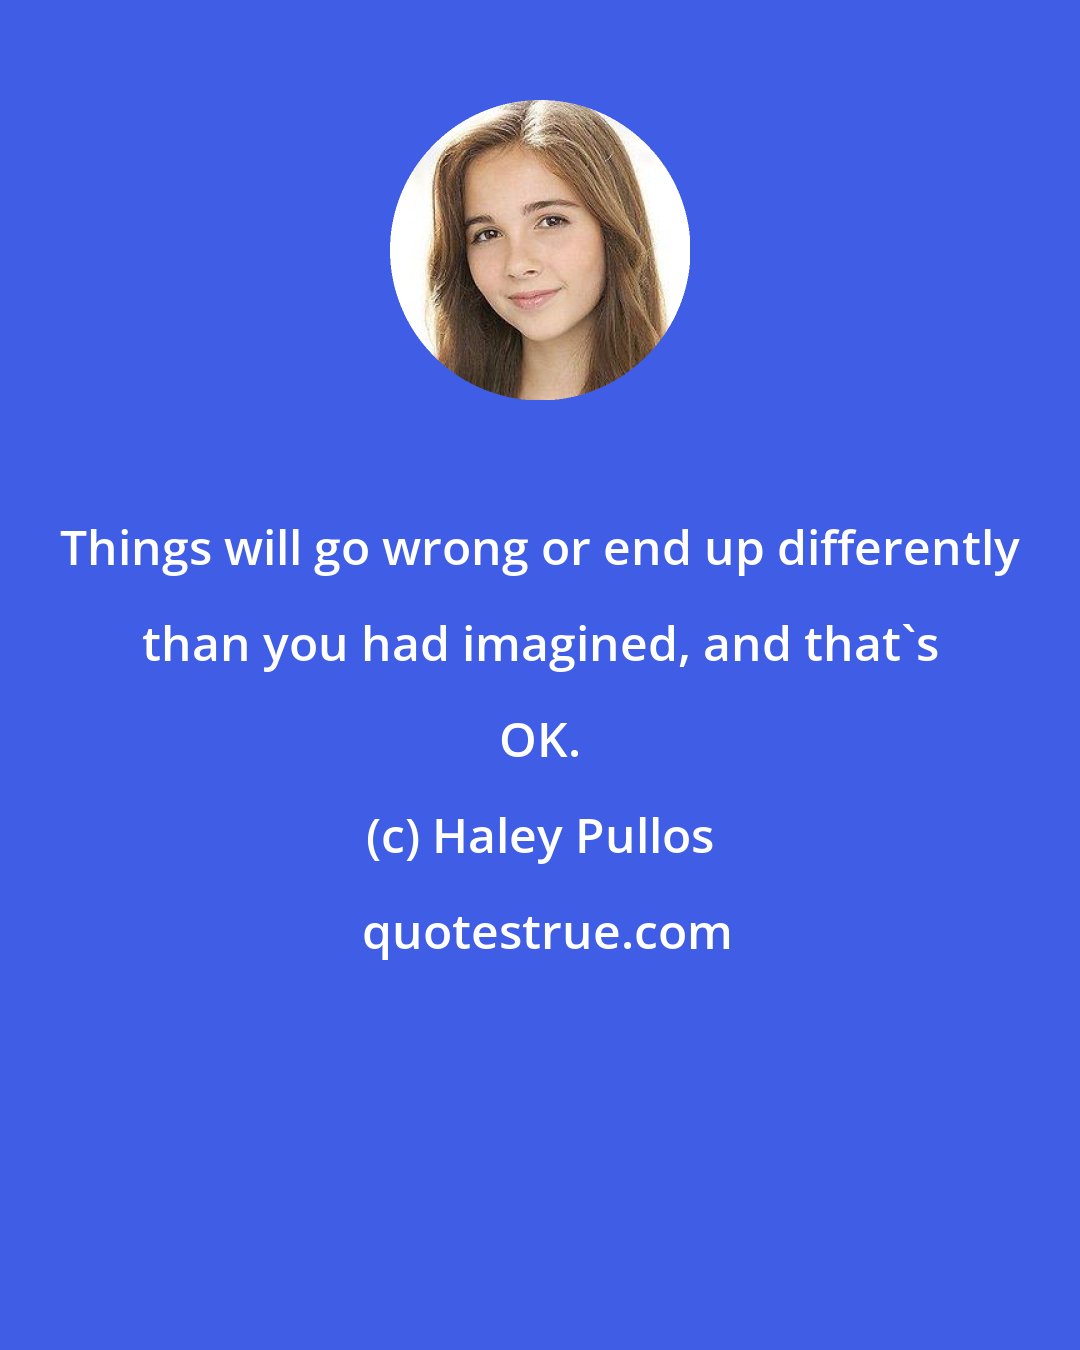 Haley Pullos: Things will go wrong or end up differently than you had imagined, and that's OK.